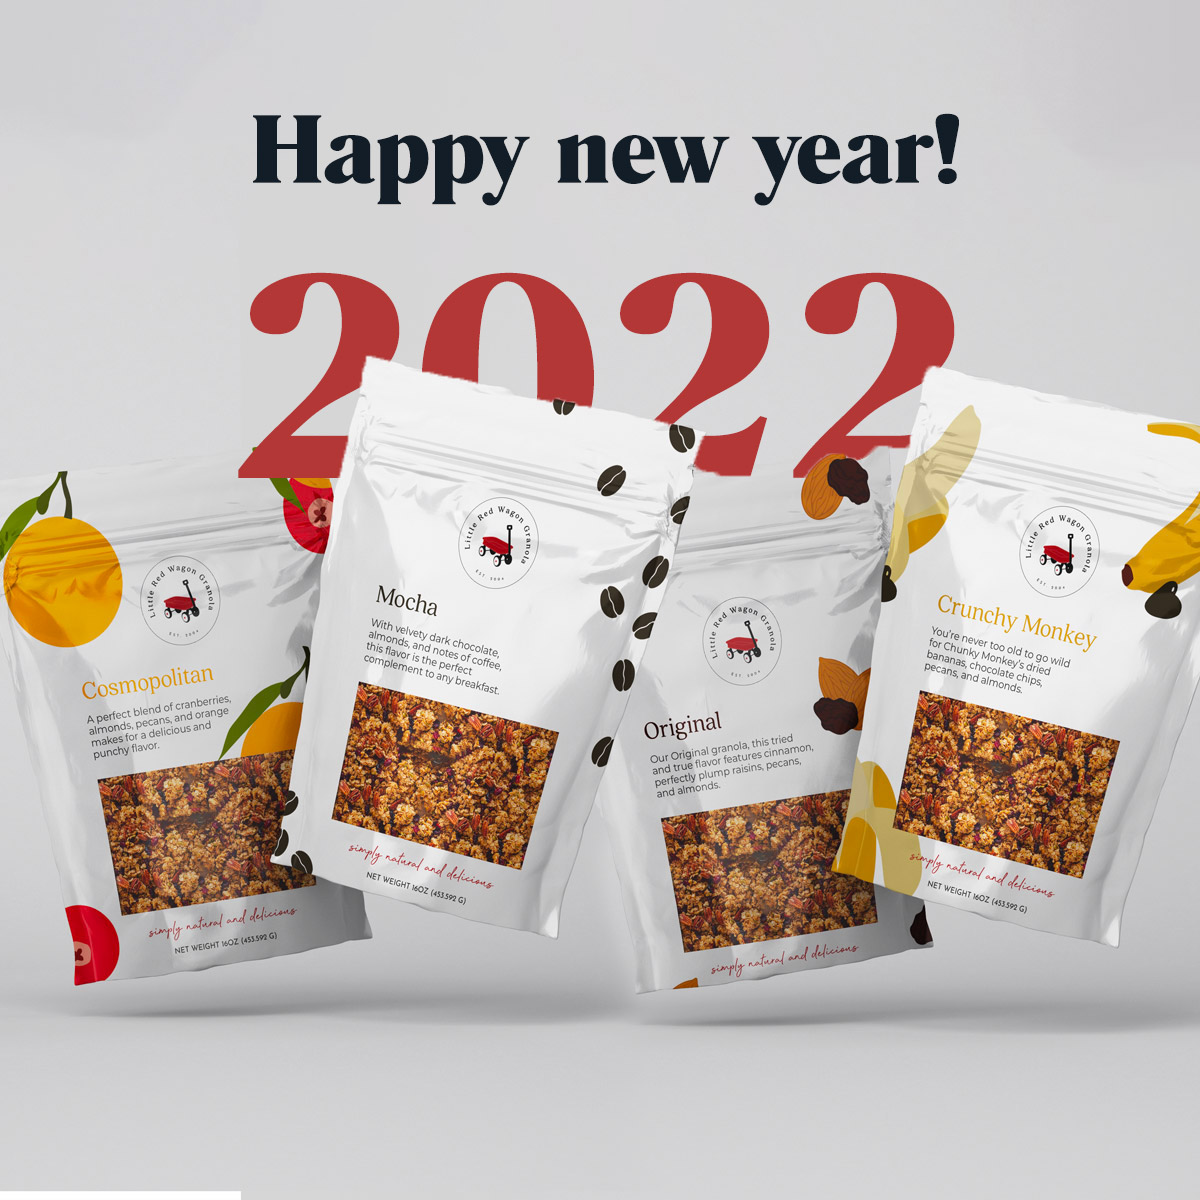 the high-fiber snack, granola, overlays the caption "Happy new year! 2022"